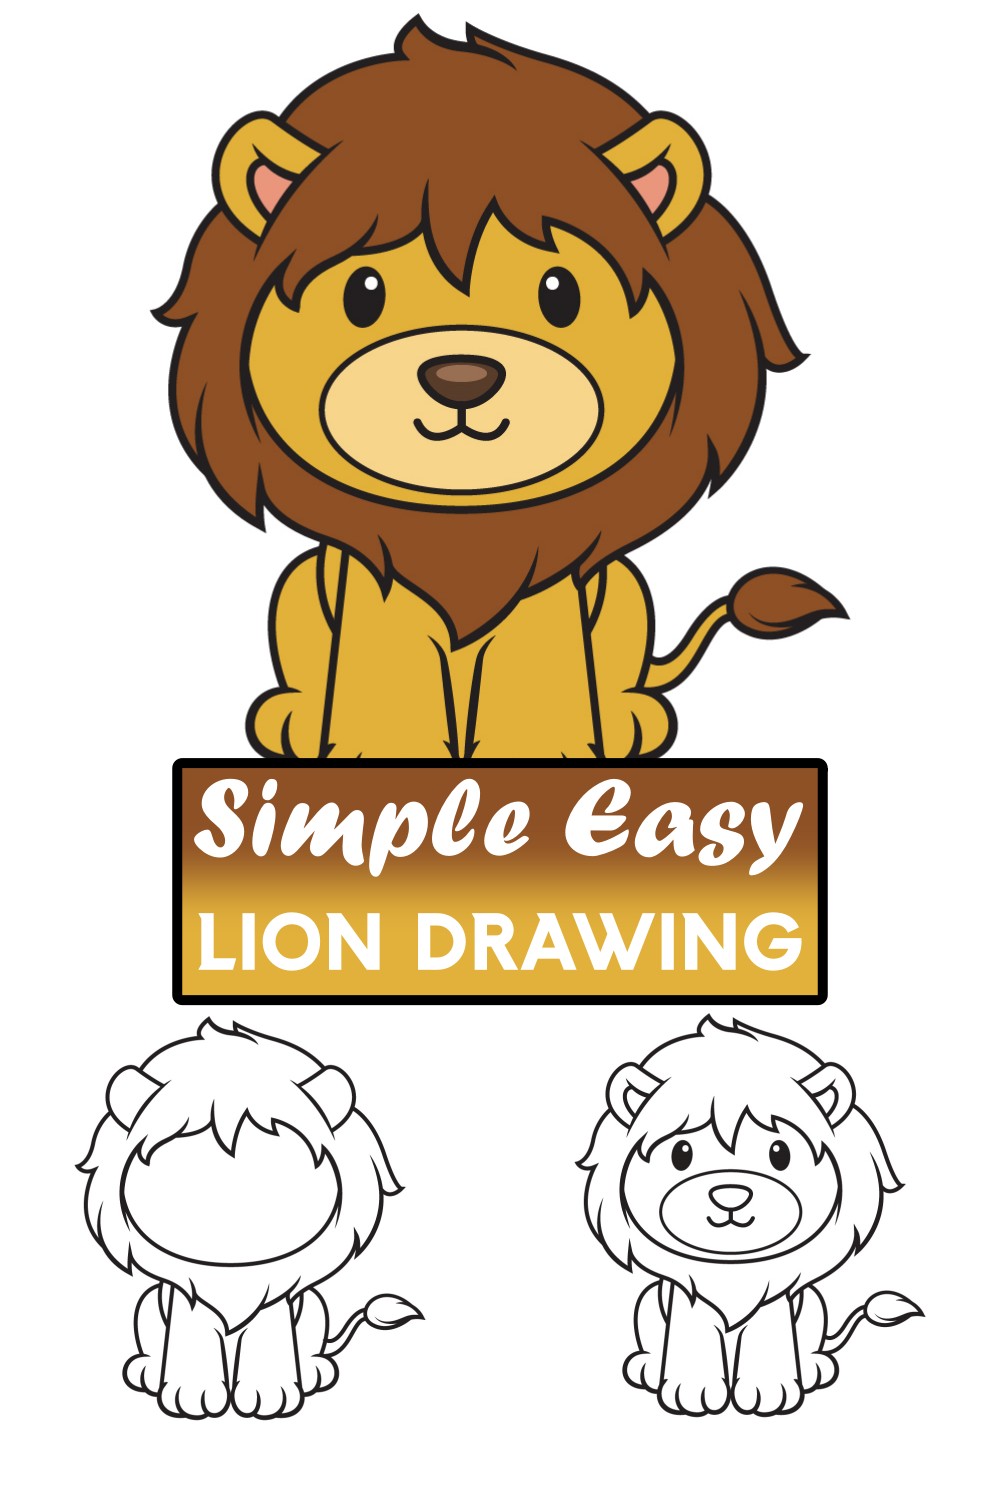 Simple Easy Lion Drawing